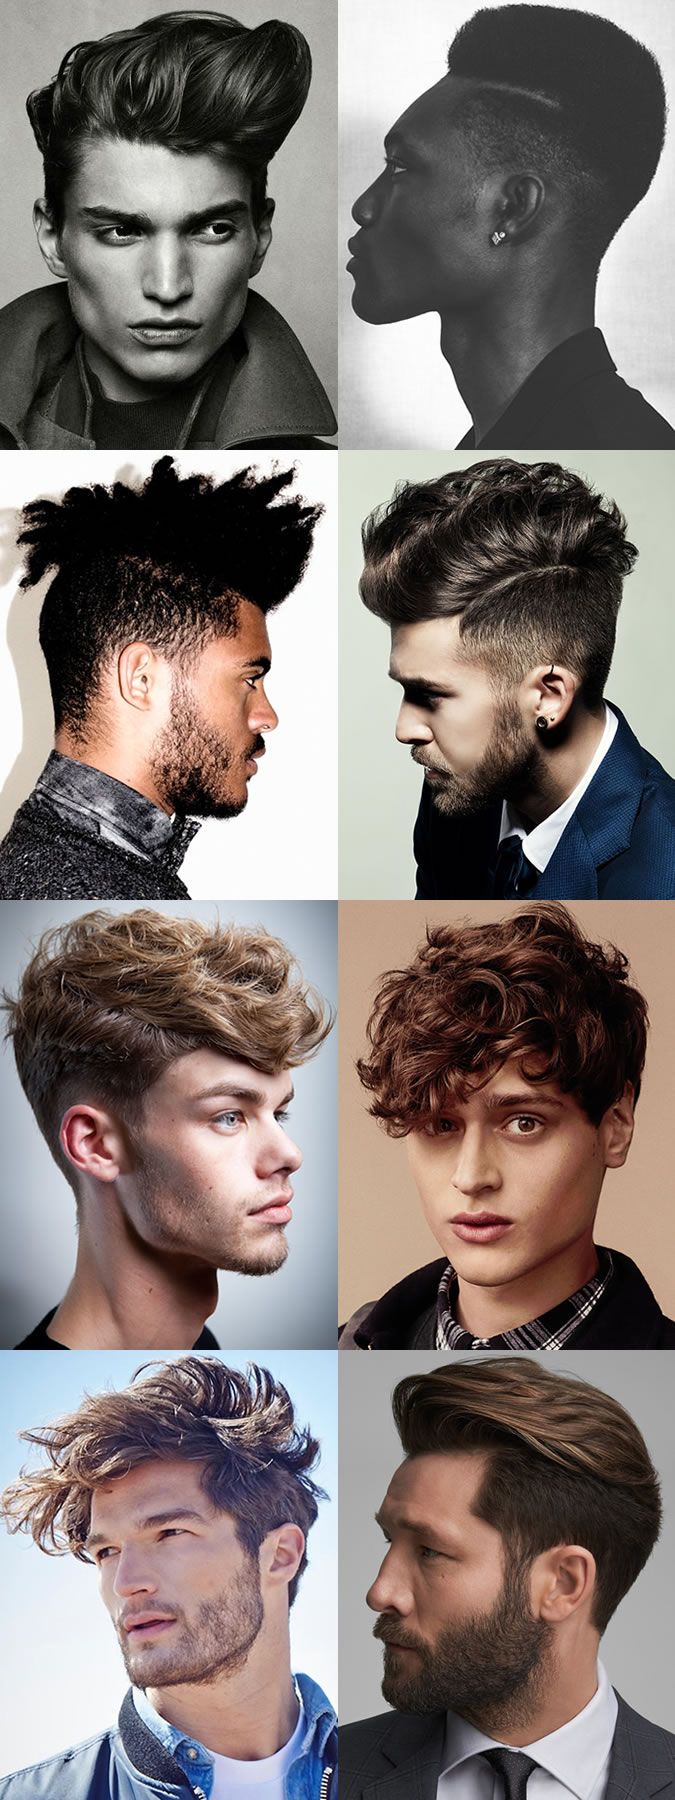 Men's Hairstyle Trends 2016 - Dramatic Contrasts and Big Shapes